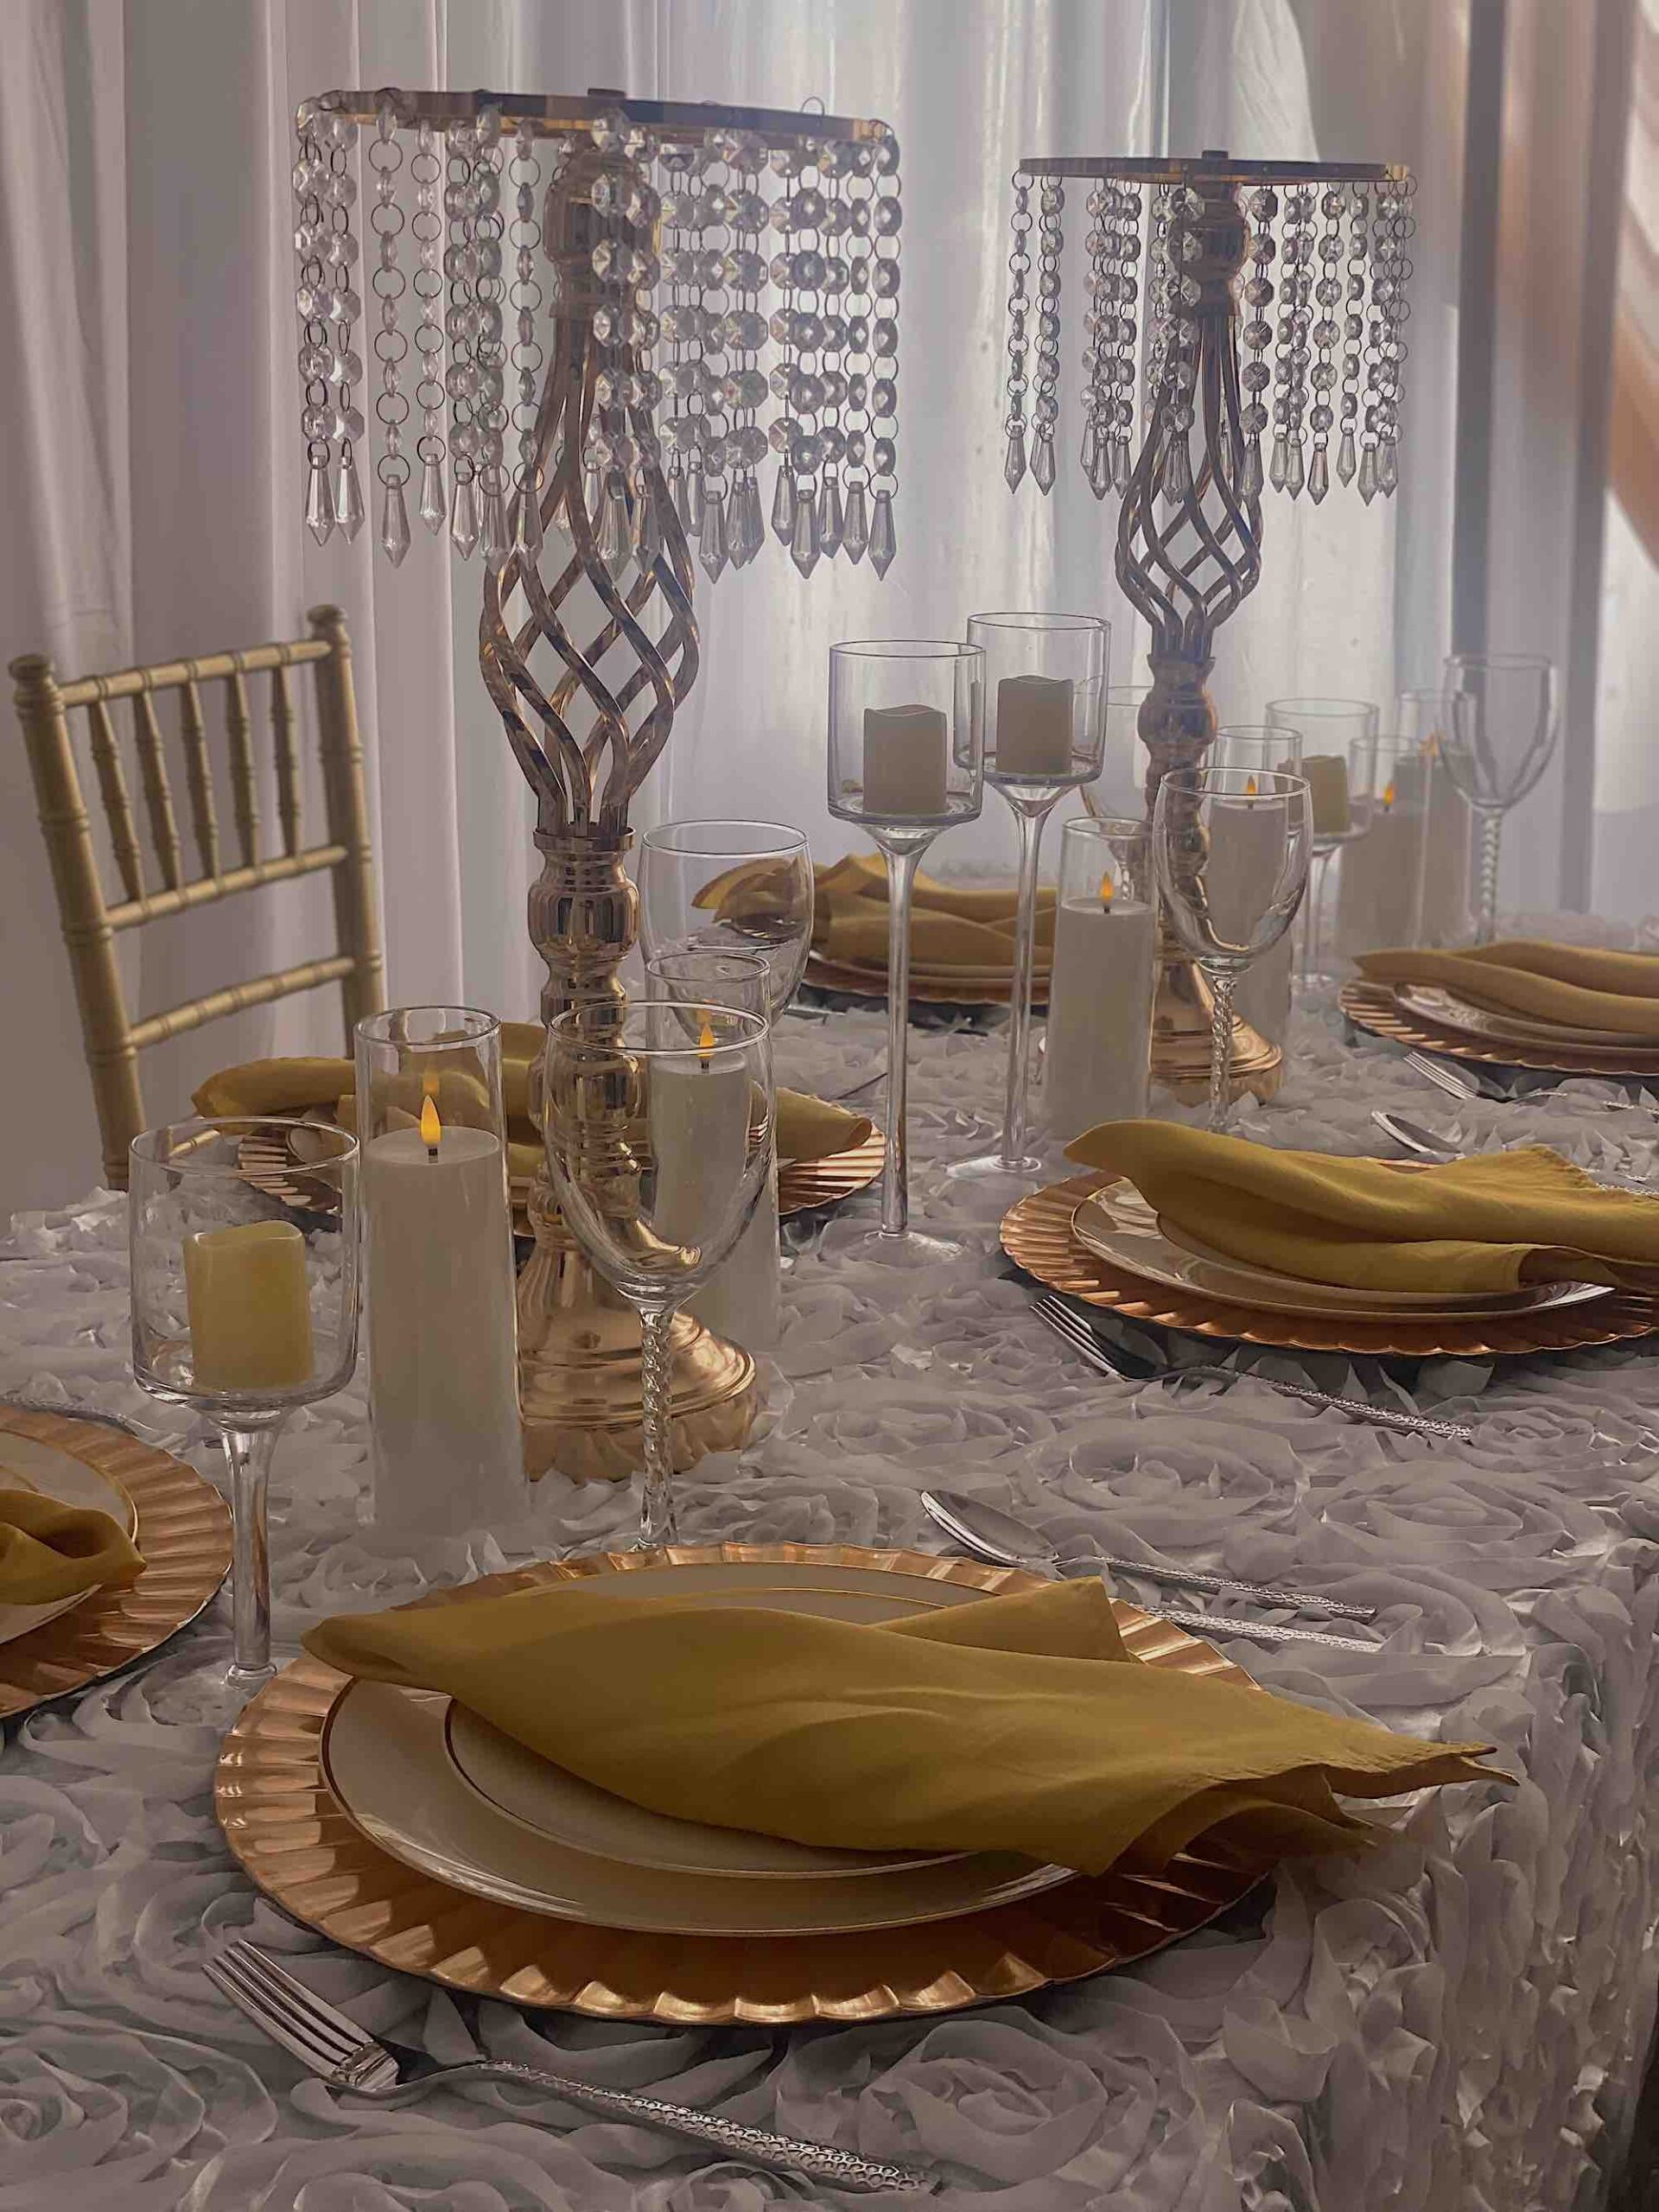 A table setting that is nicely decorated.